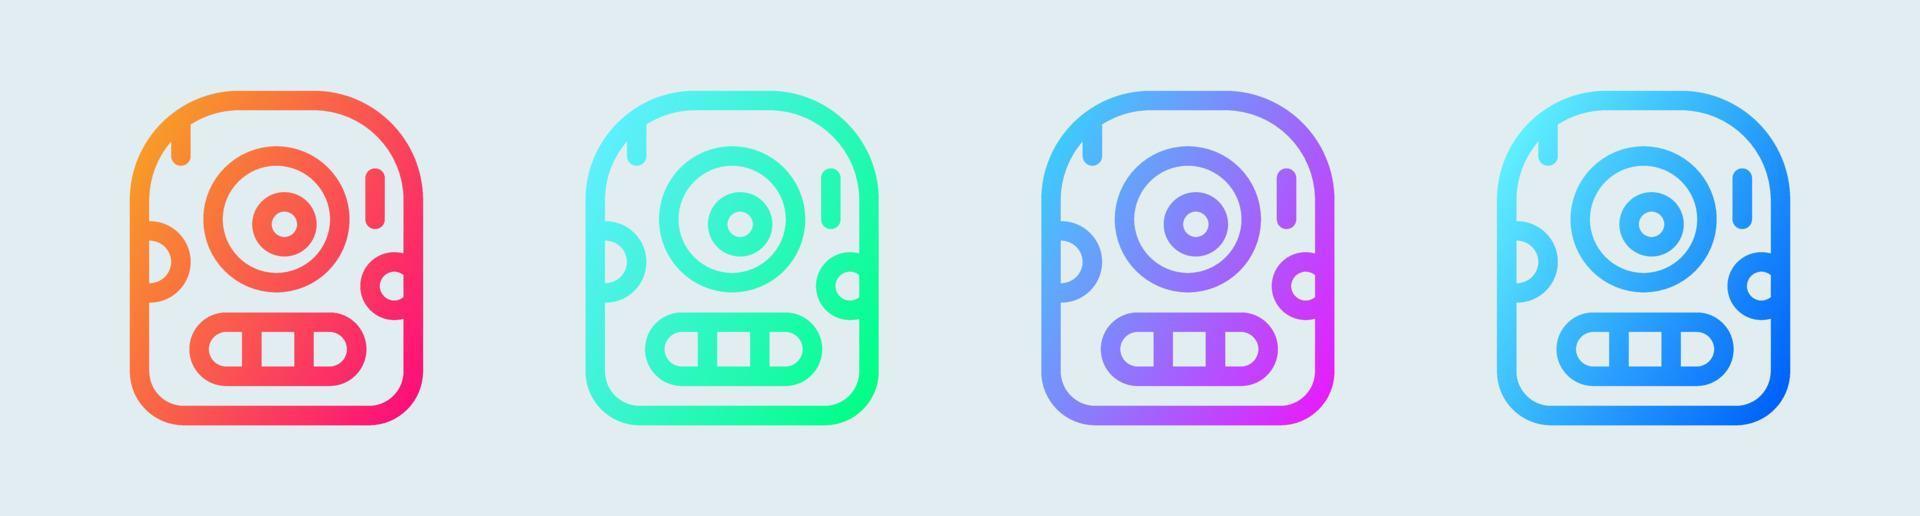 Monsters line icon in gradient colors. Cute character signs vector illustration.